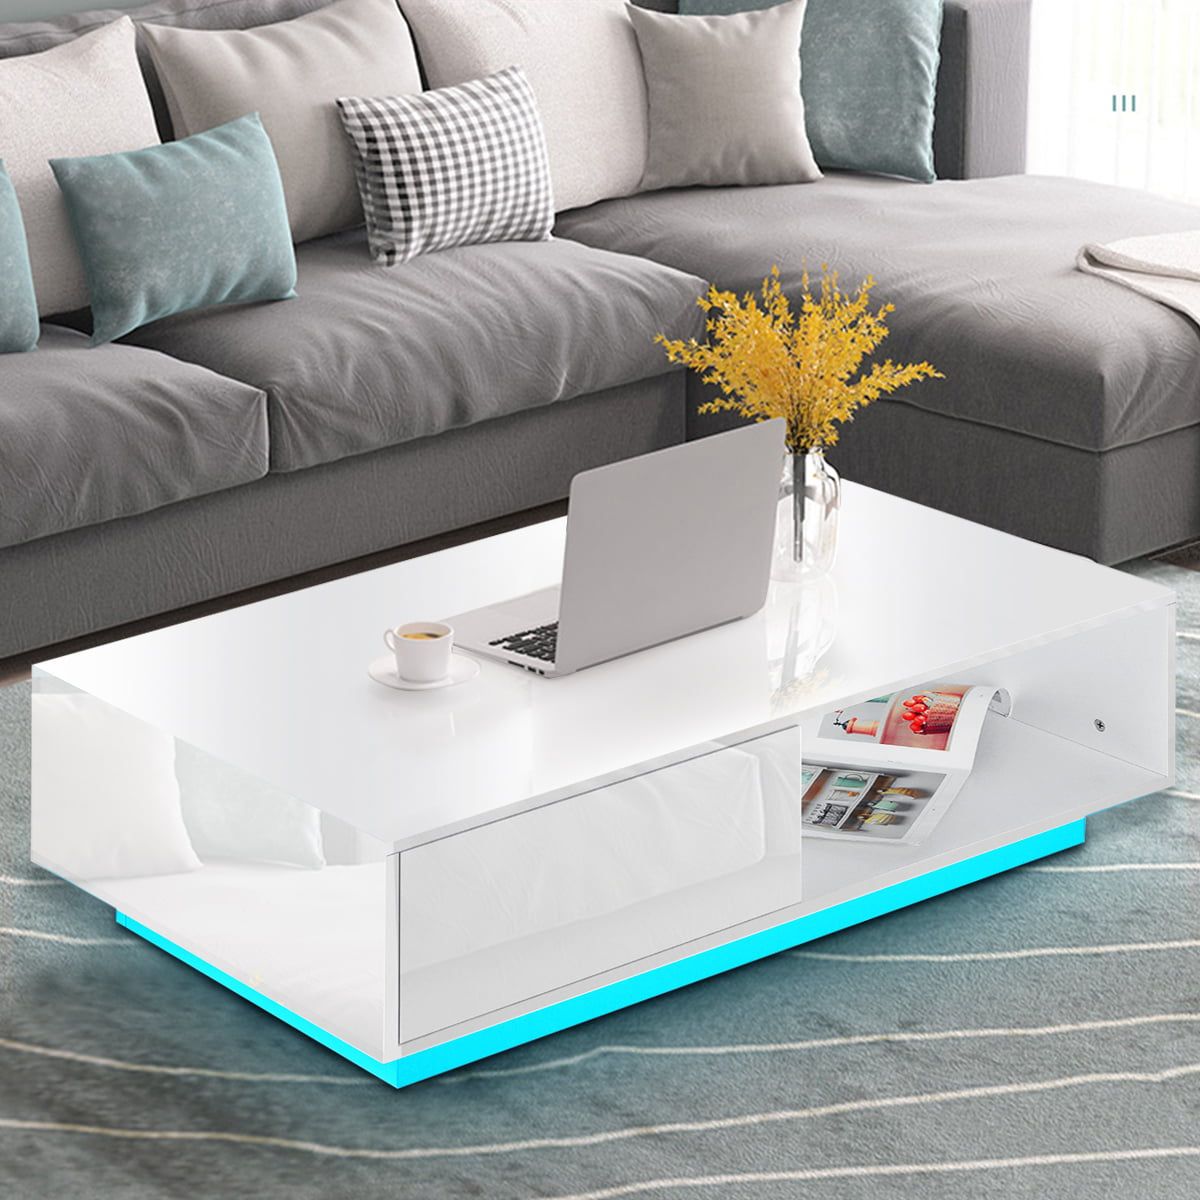 High Gloss Rgb Led Coffee Table With 2 Drawer Storage Modern Sofa Side Within Rectangular Led Coffee Tables (View 12 of 20)